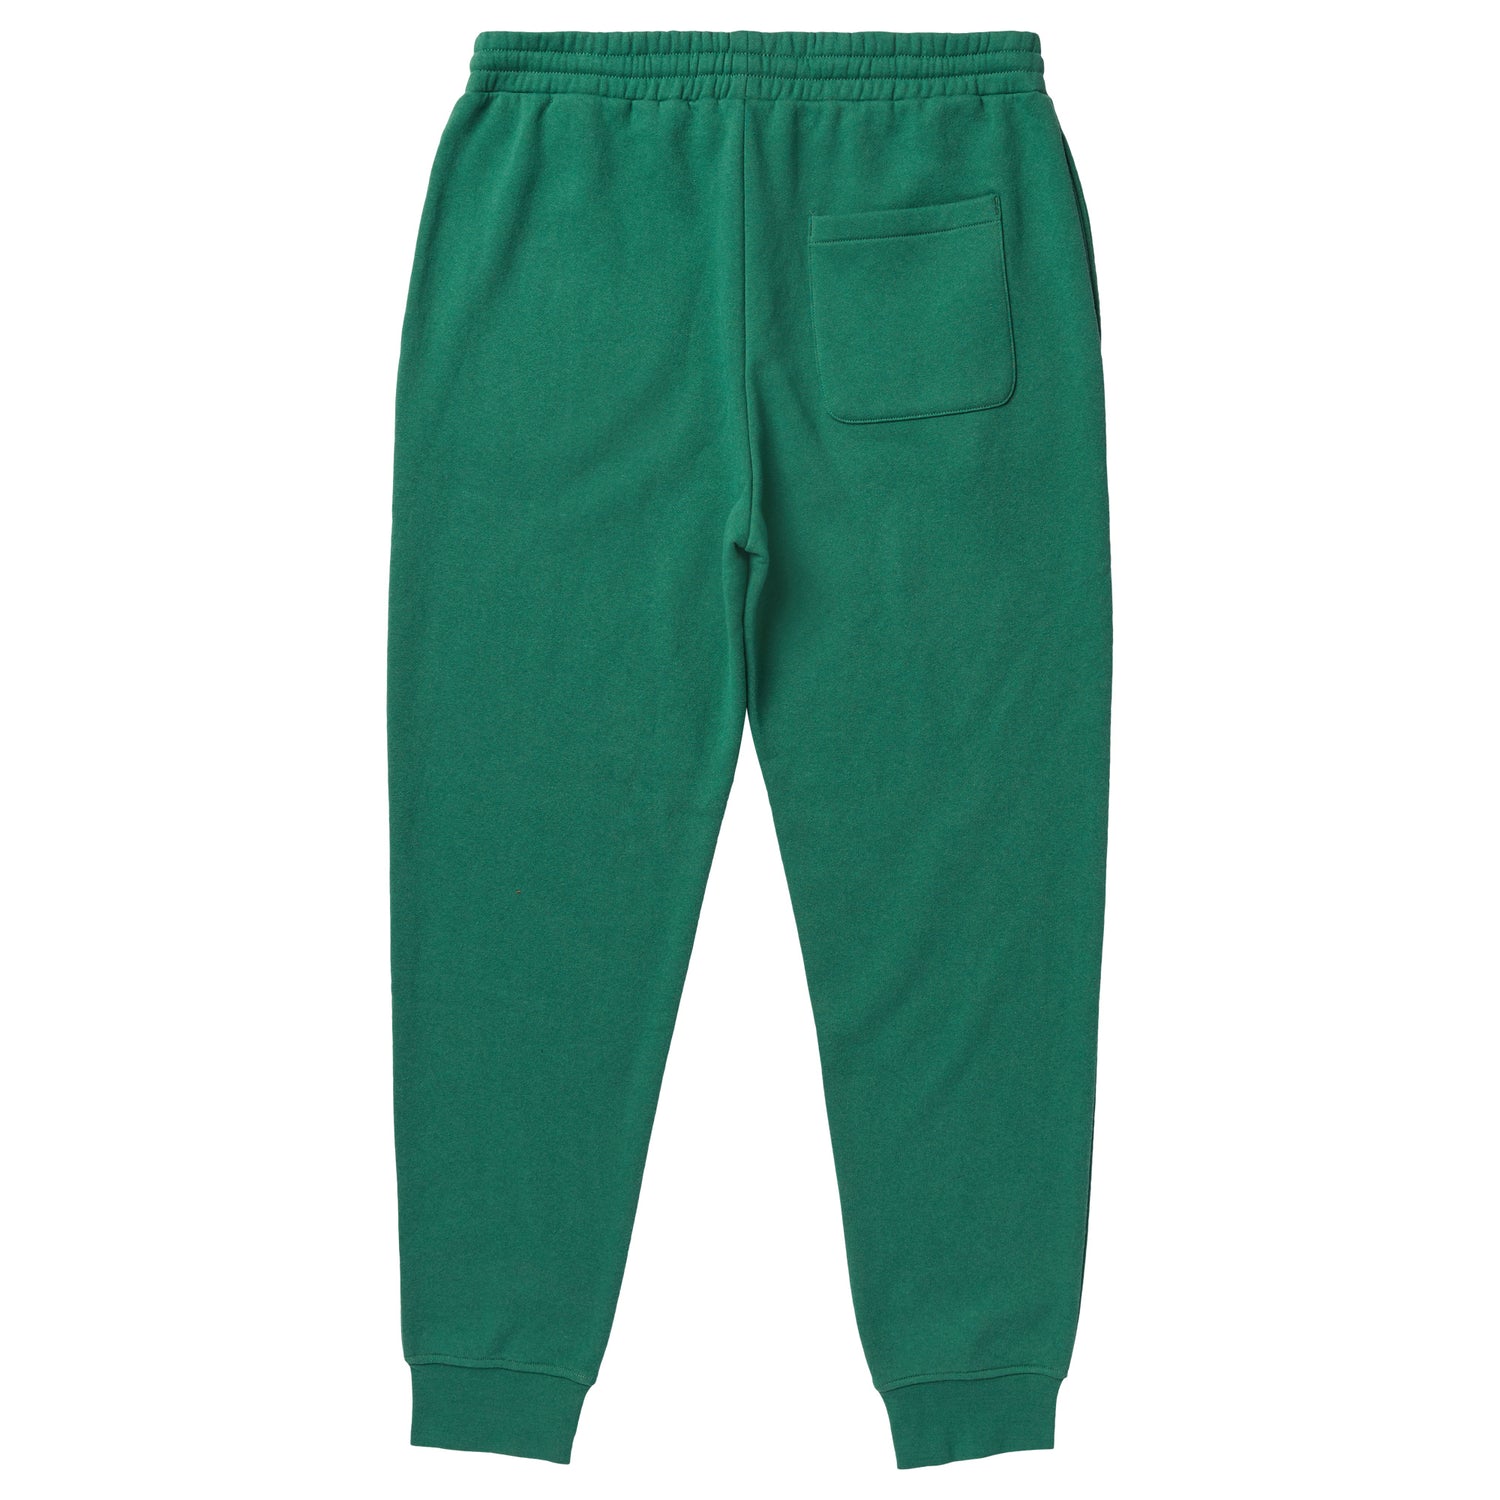 OUTDOORS CYCLE JOGGER SWEATPANTS - PALM